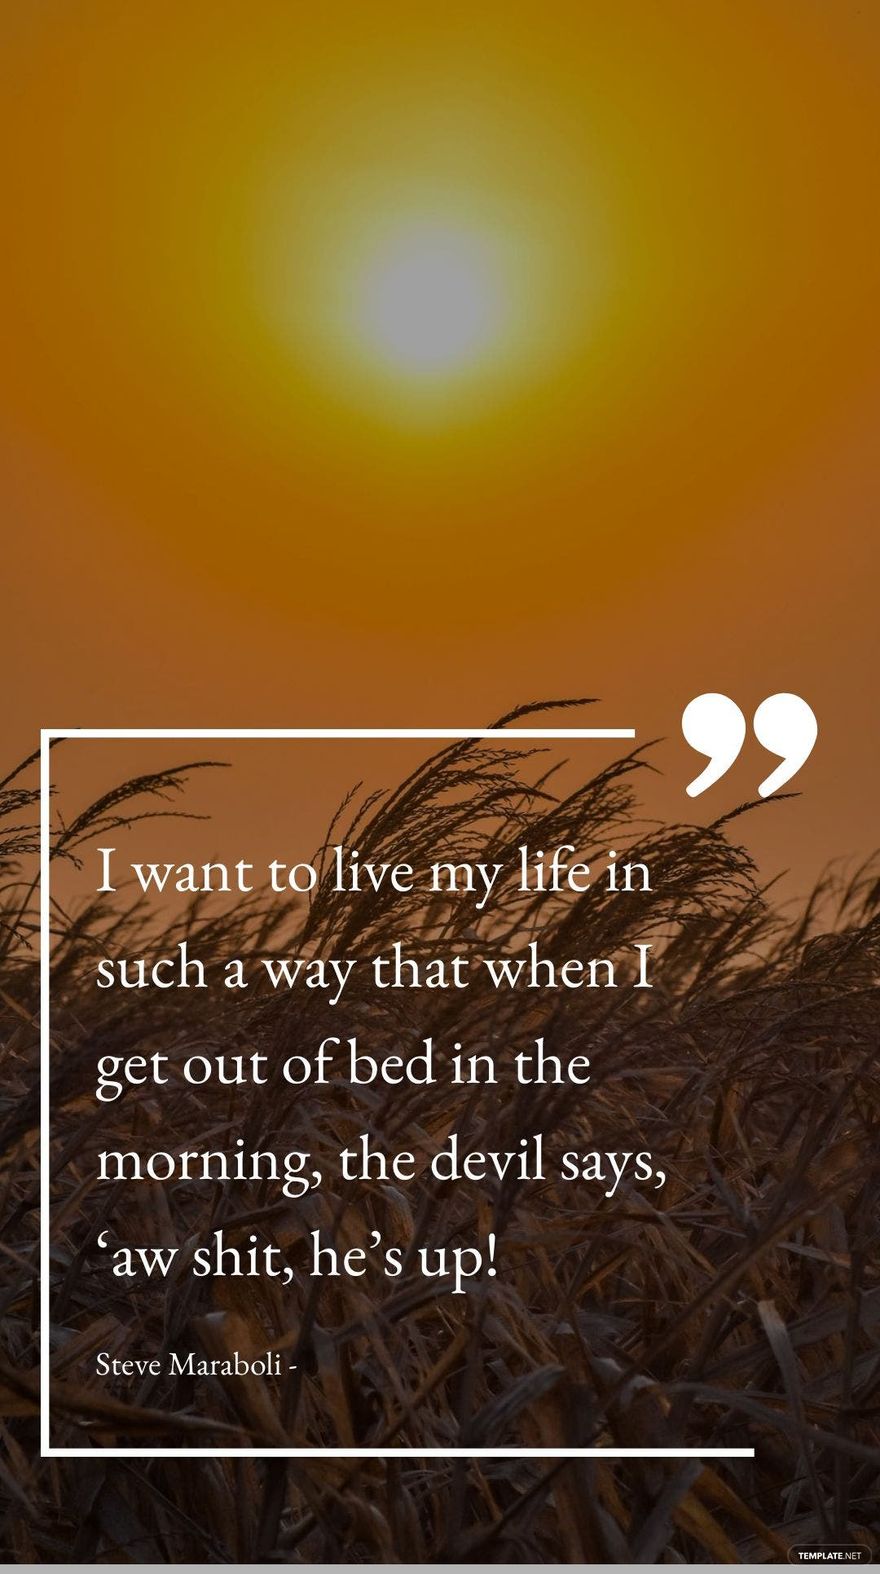 Steve Maraboli - I want to live my life in such a way that when I get out of bed in the morning, the devil says, ‘aw shit, he’s up!